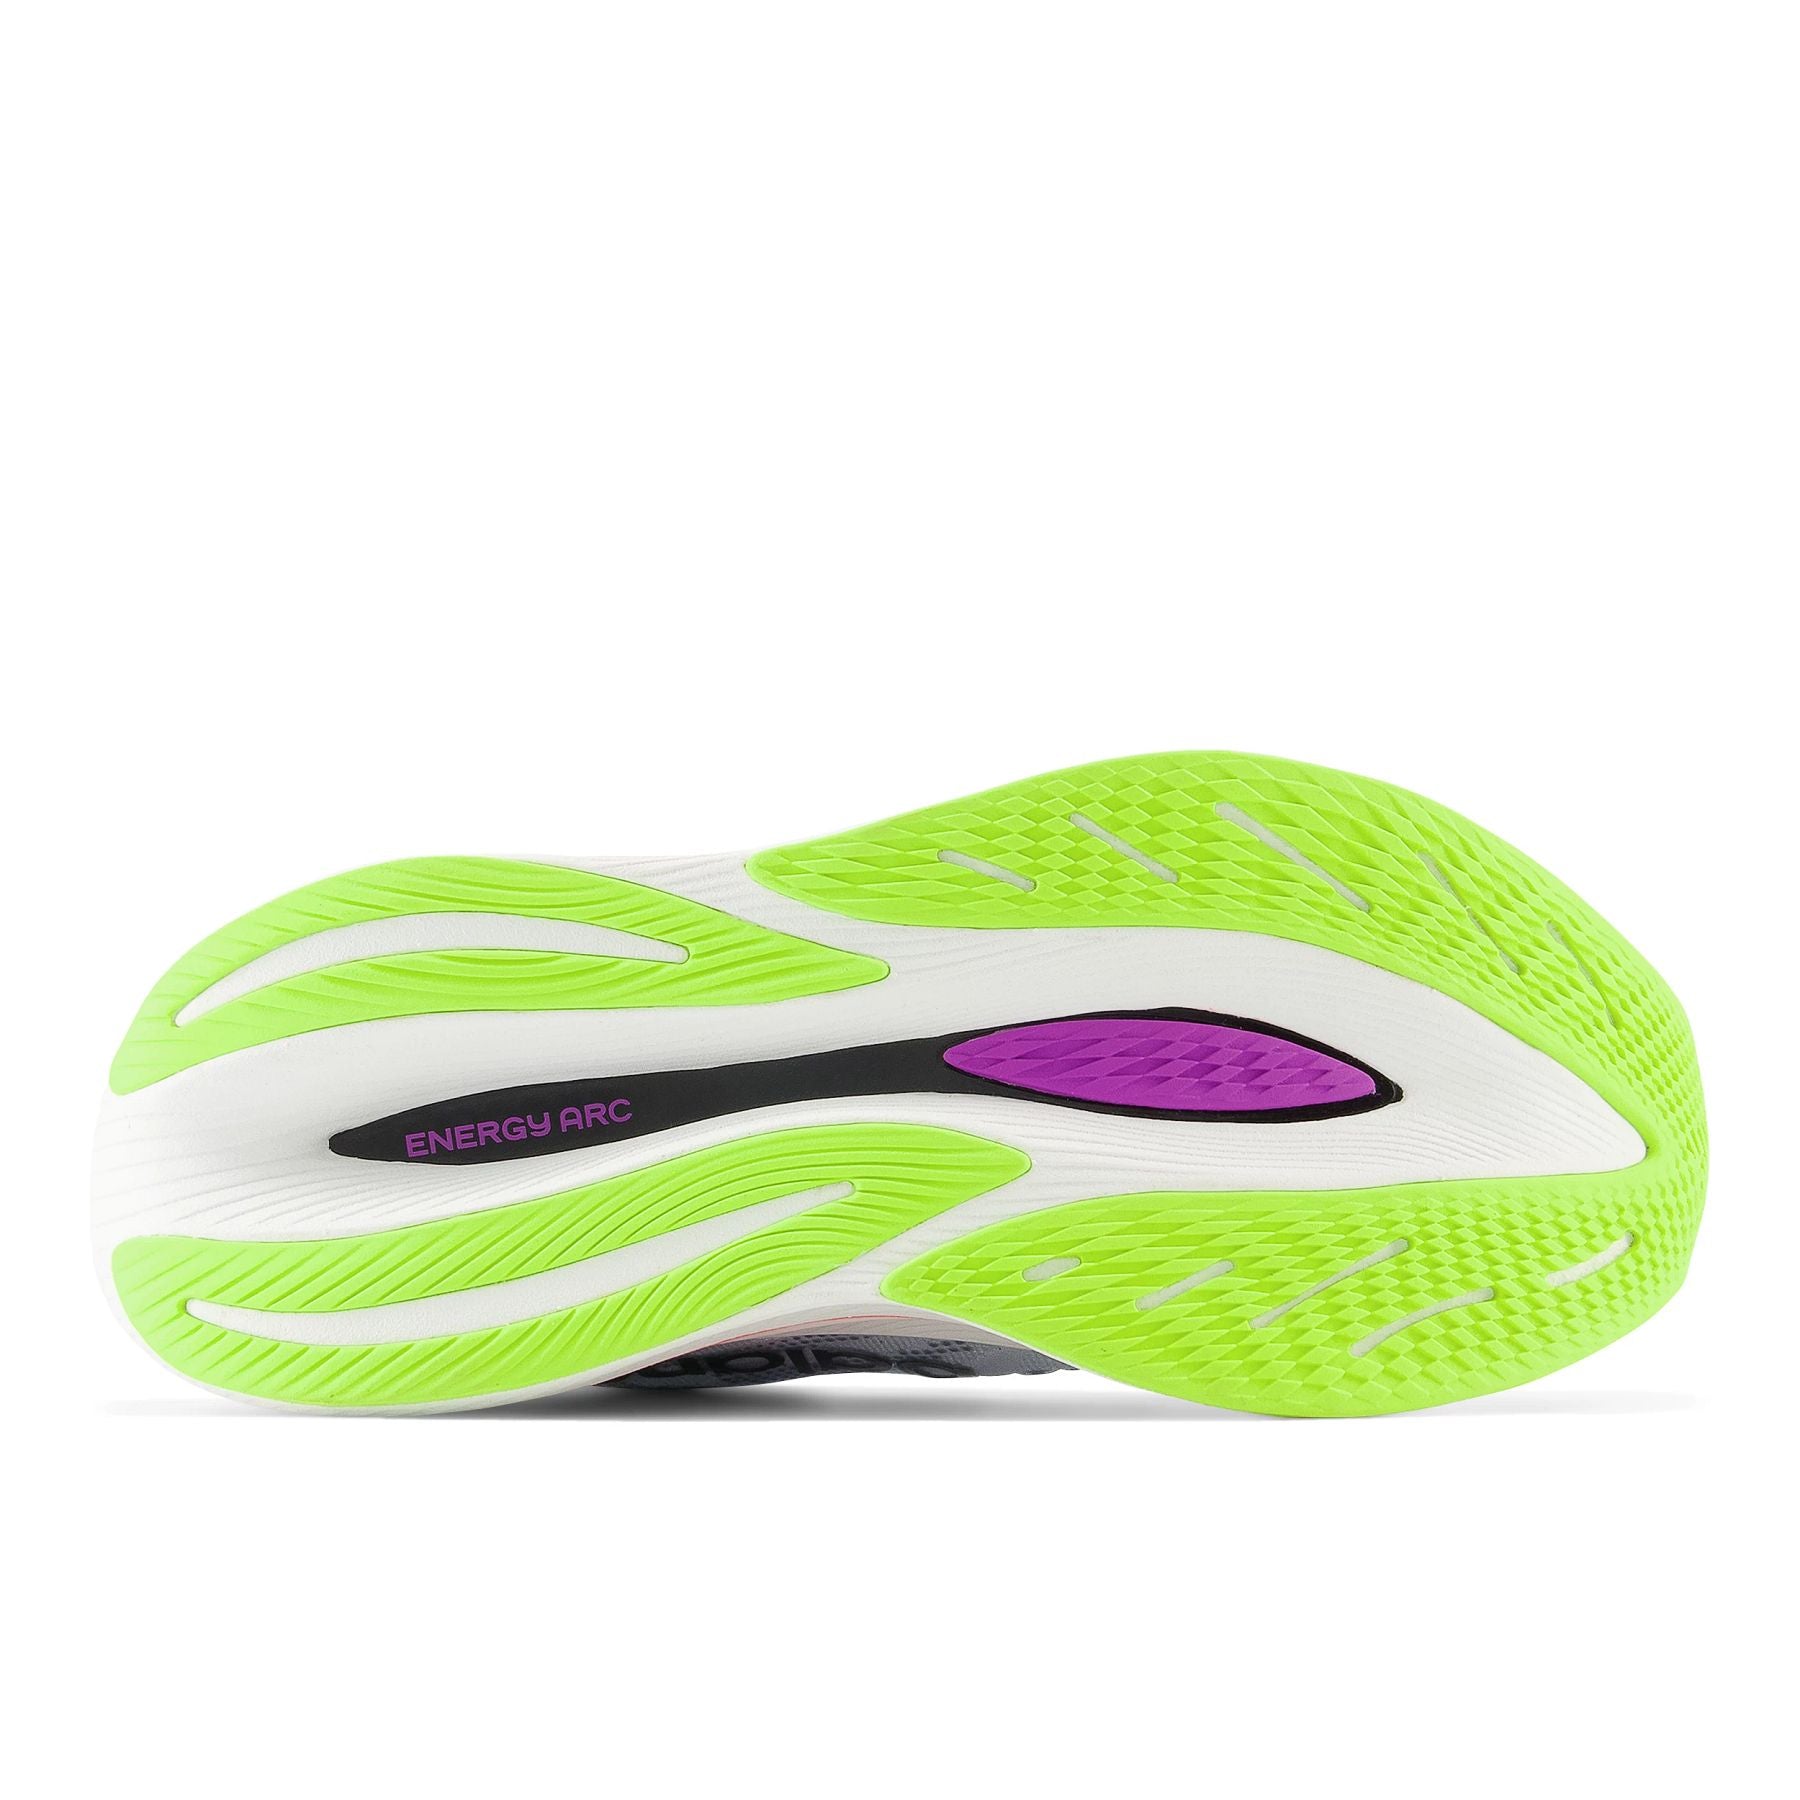 Bottom (outer sole) view of the Men's Fuel Cell SuperComp Trainer V2 in the color Ice Blue/Neon Dragonfly